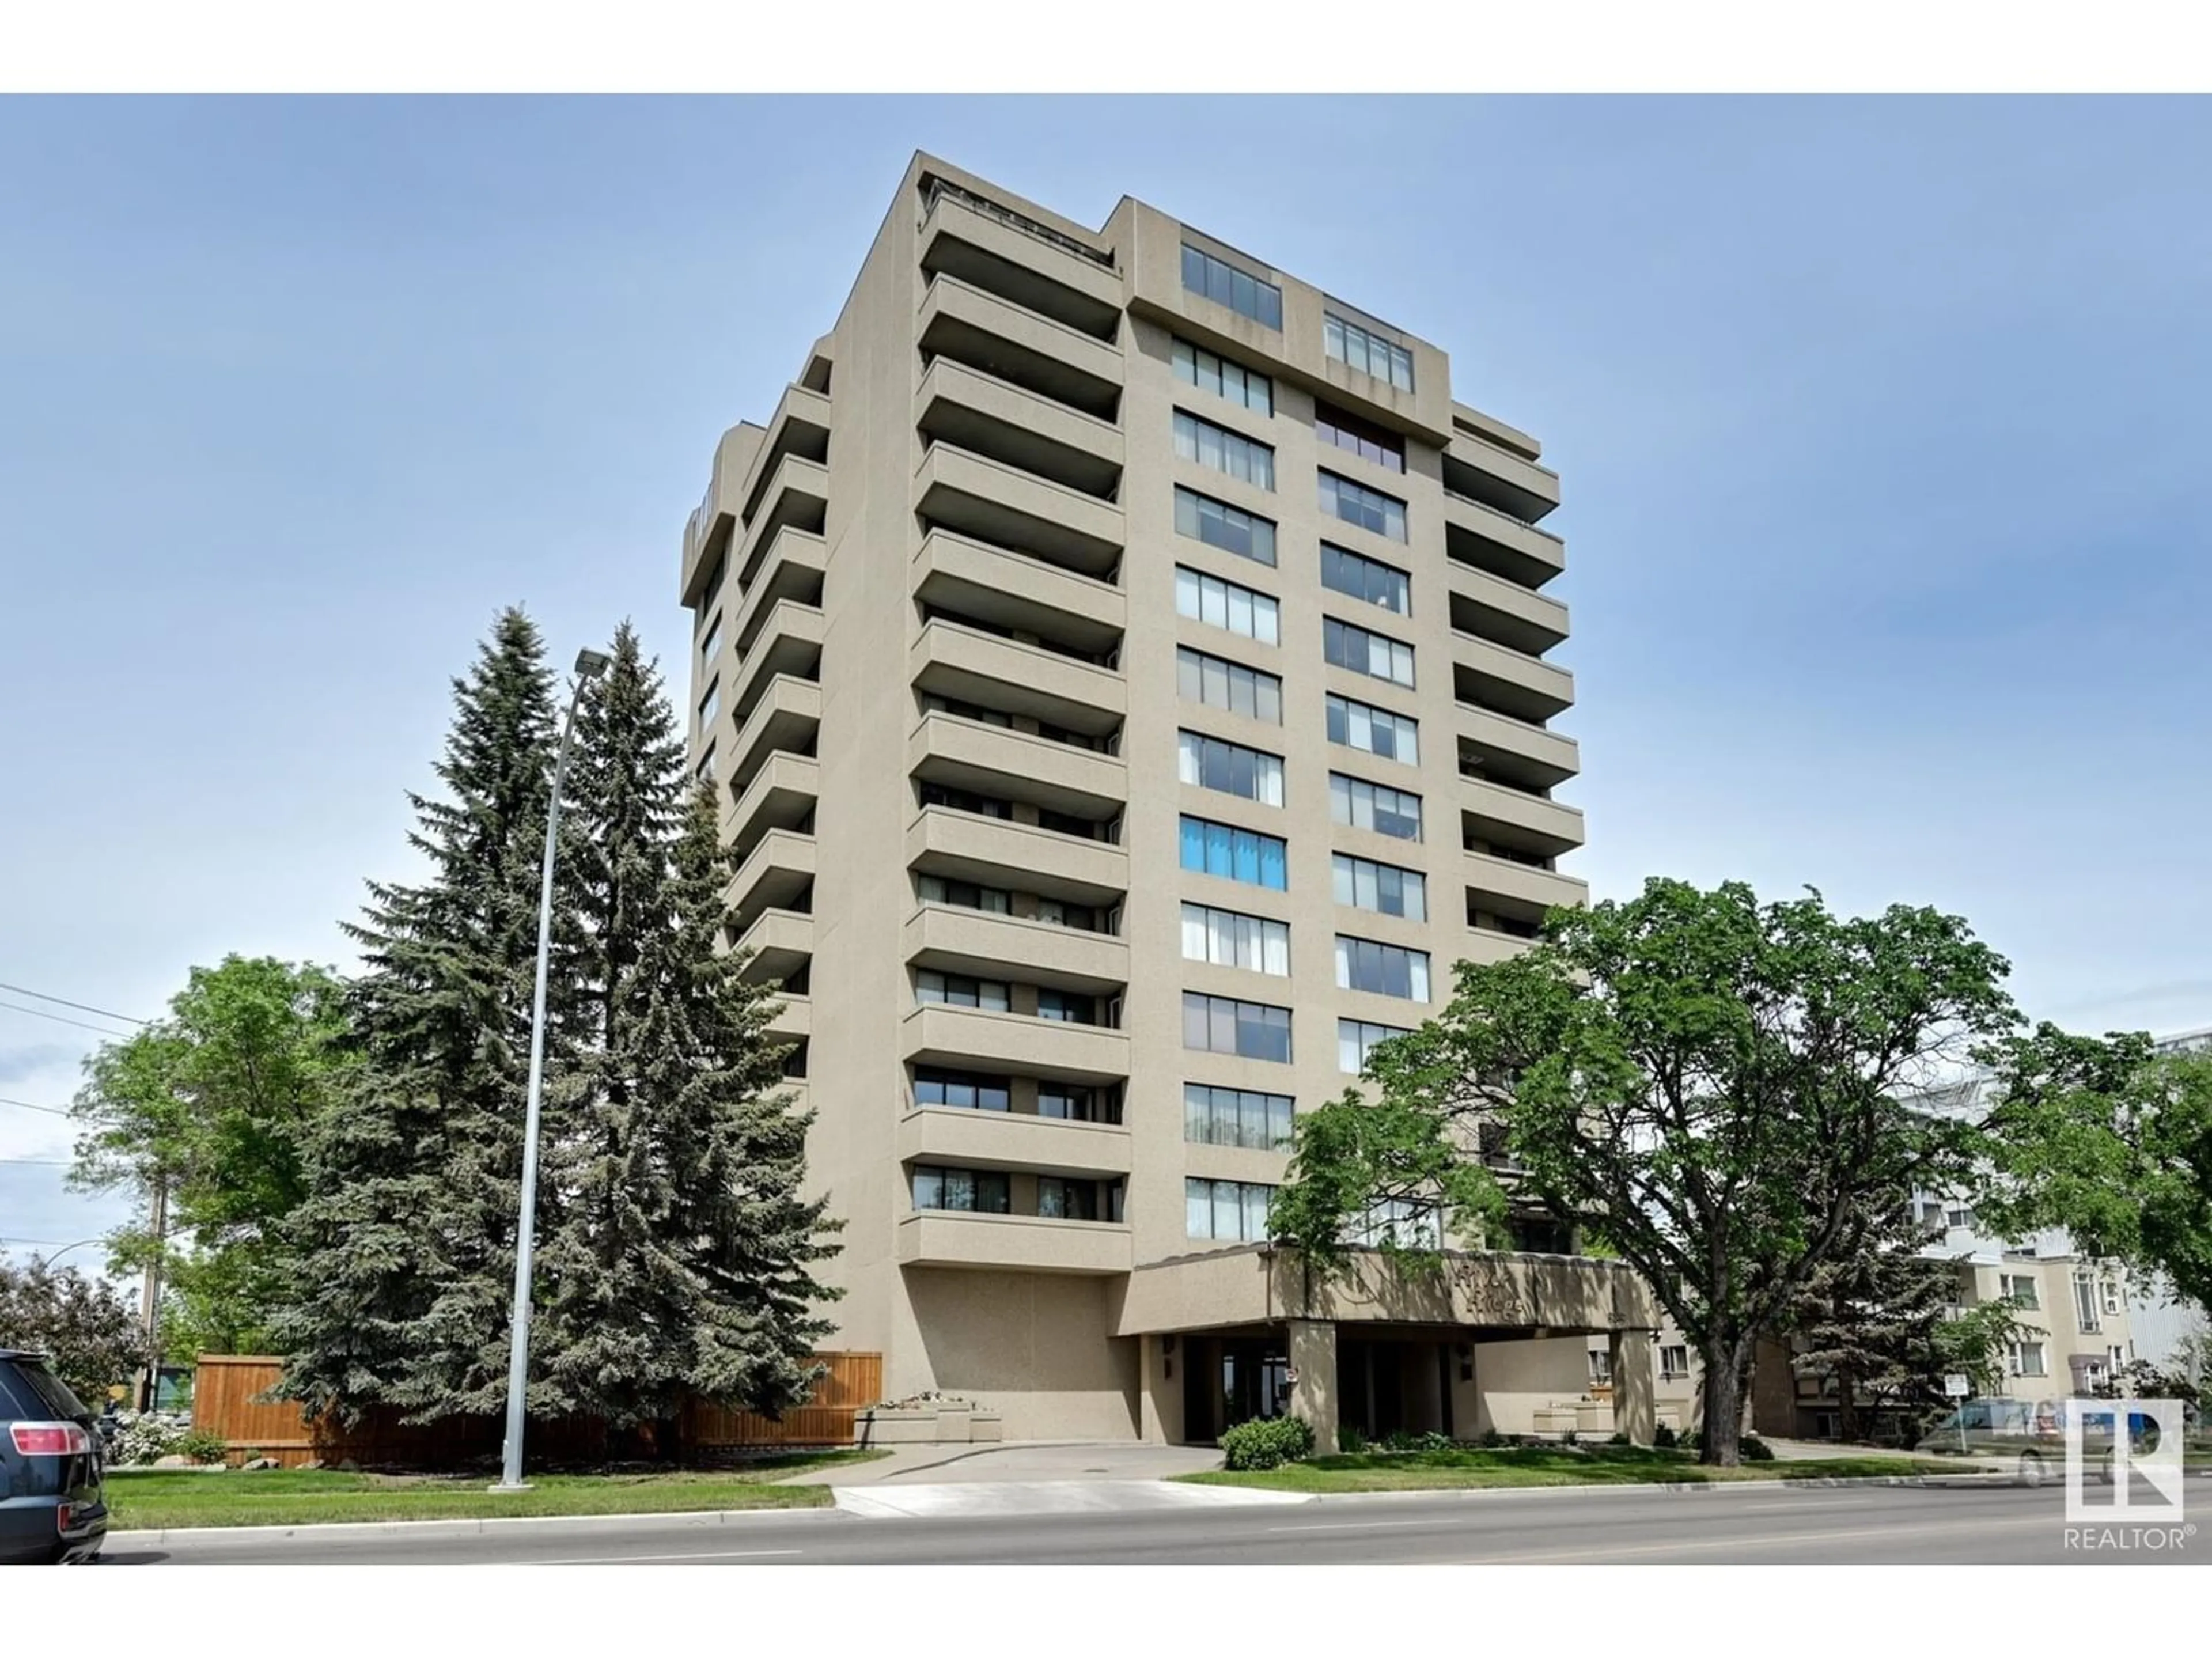 A pic from exterior of the house or condo for #306 8340 JASPER AV NW, Edmonton Alberta T5H4C6